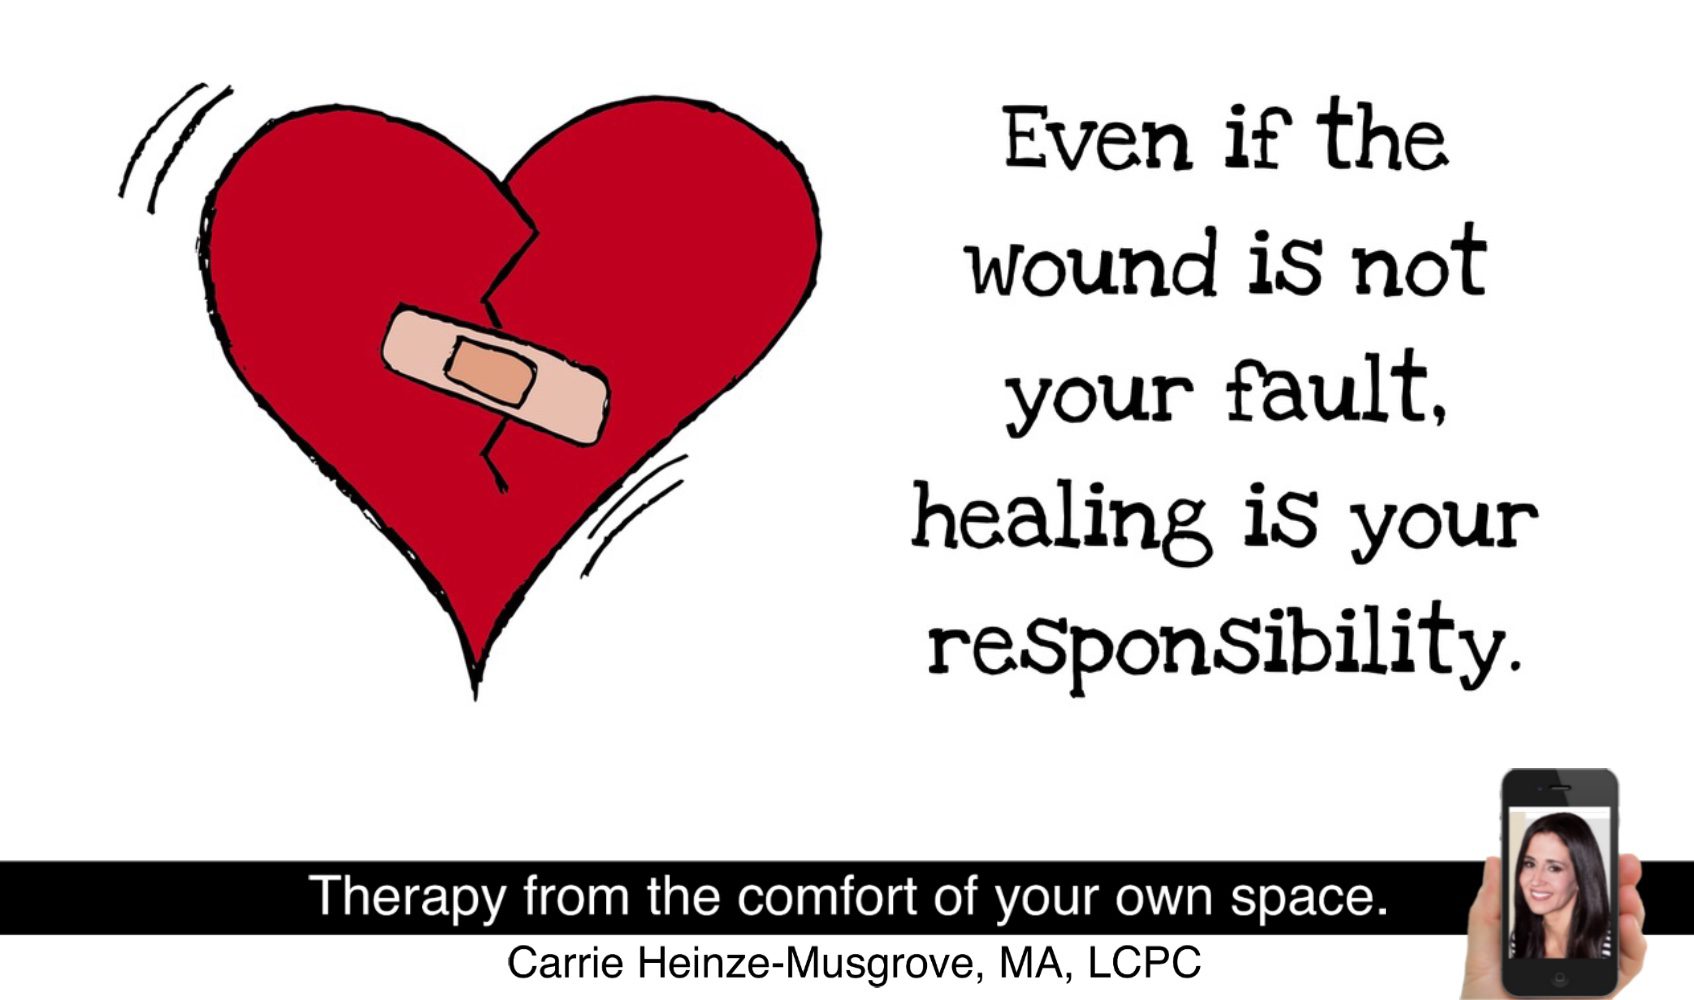 Healing is your responsibility.